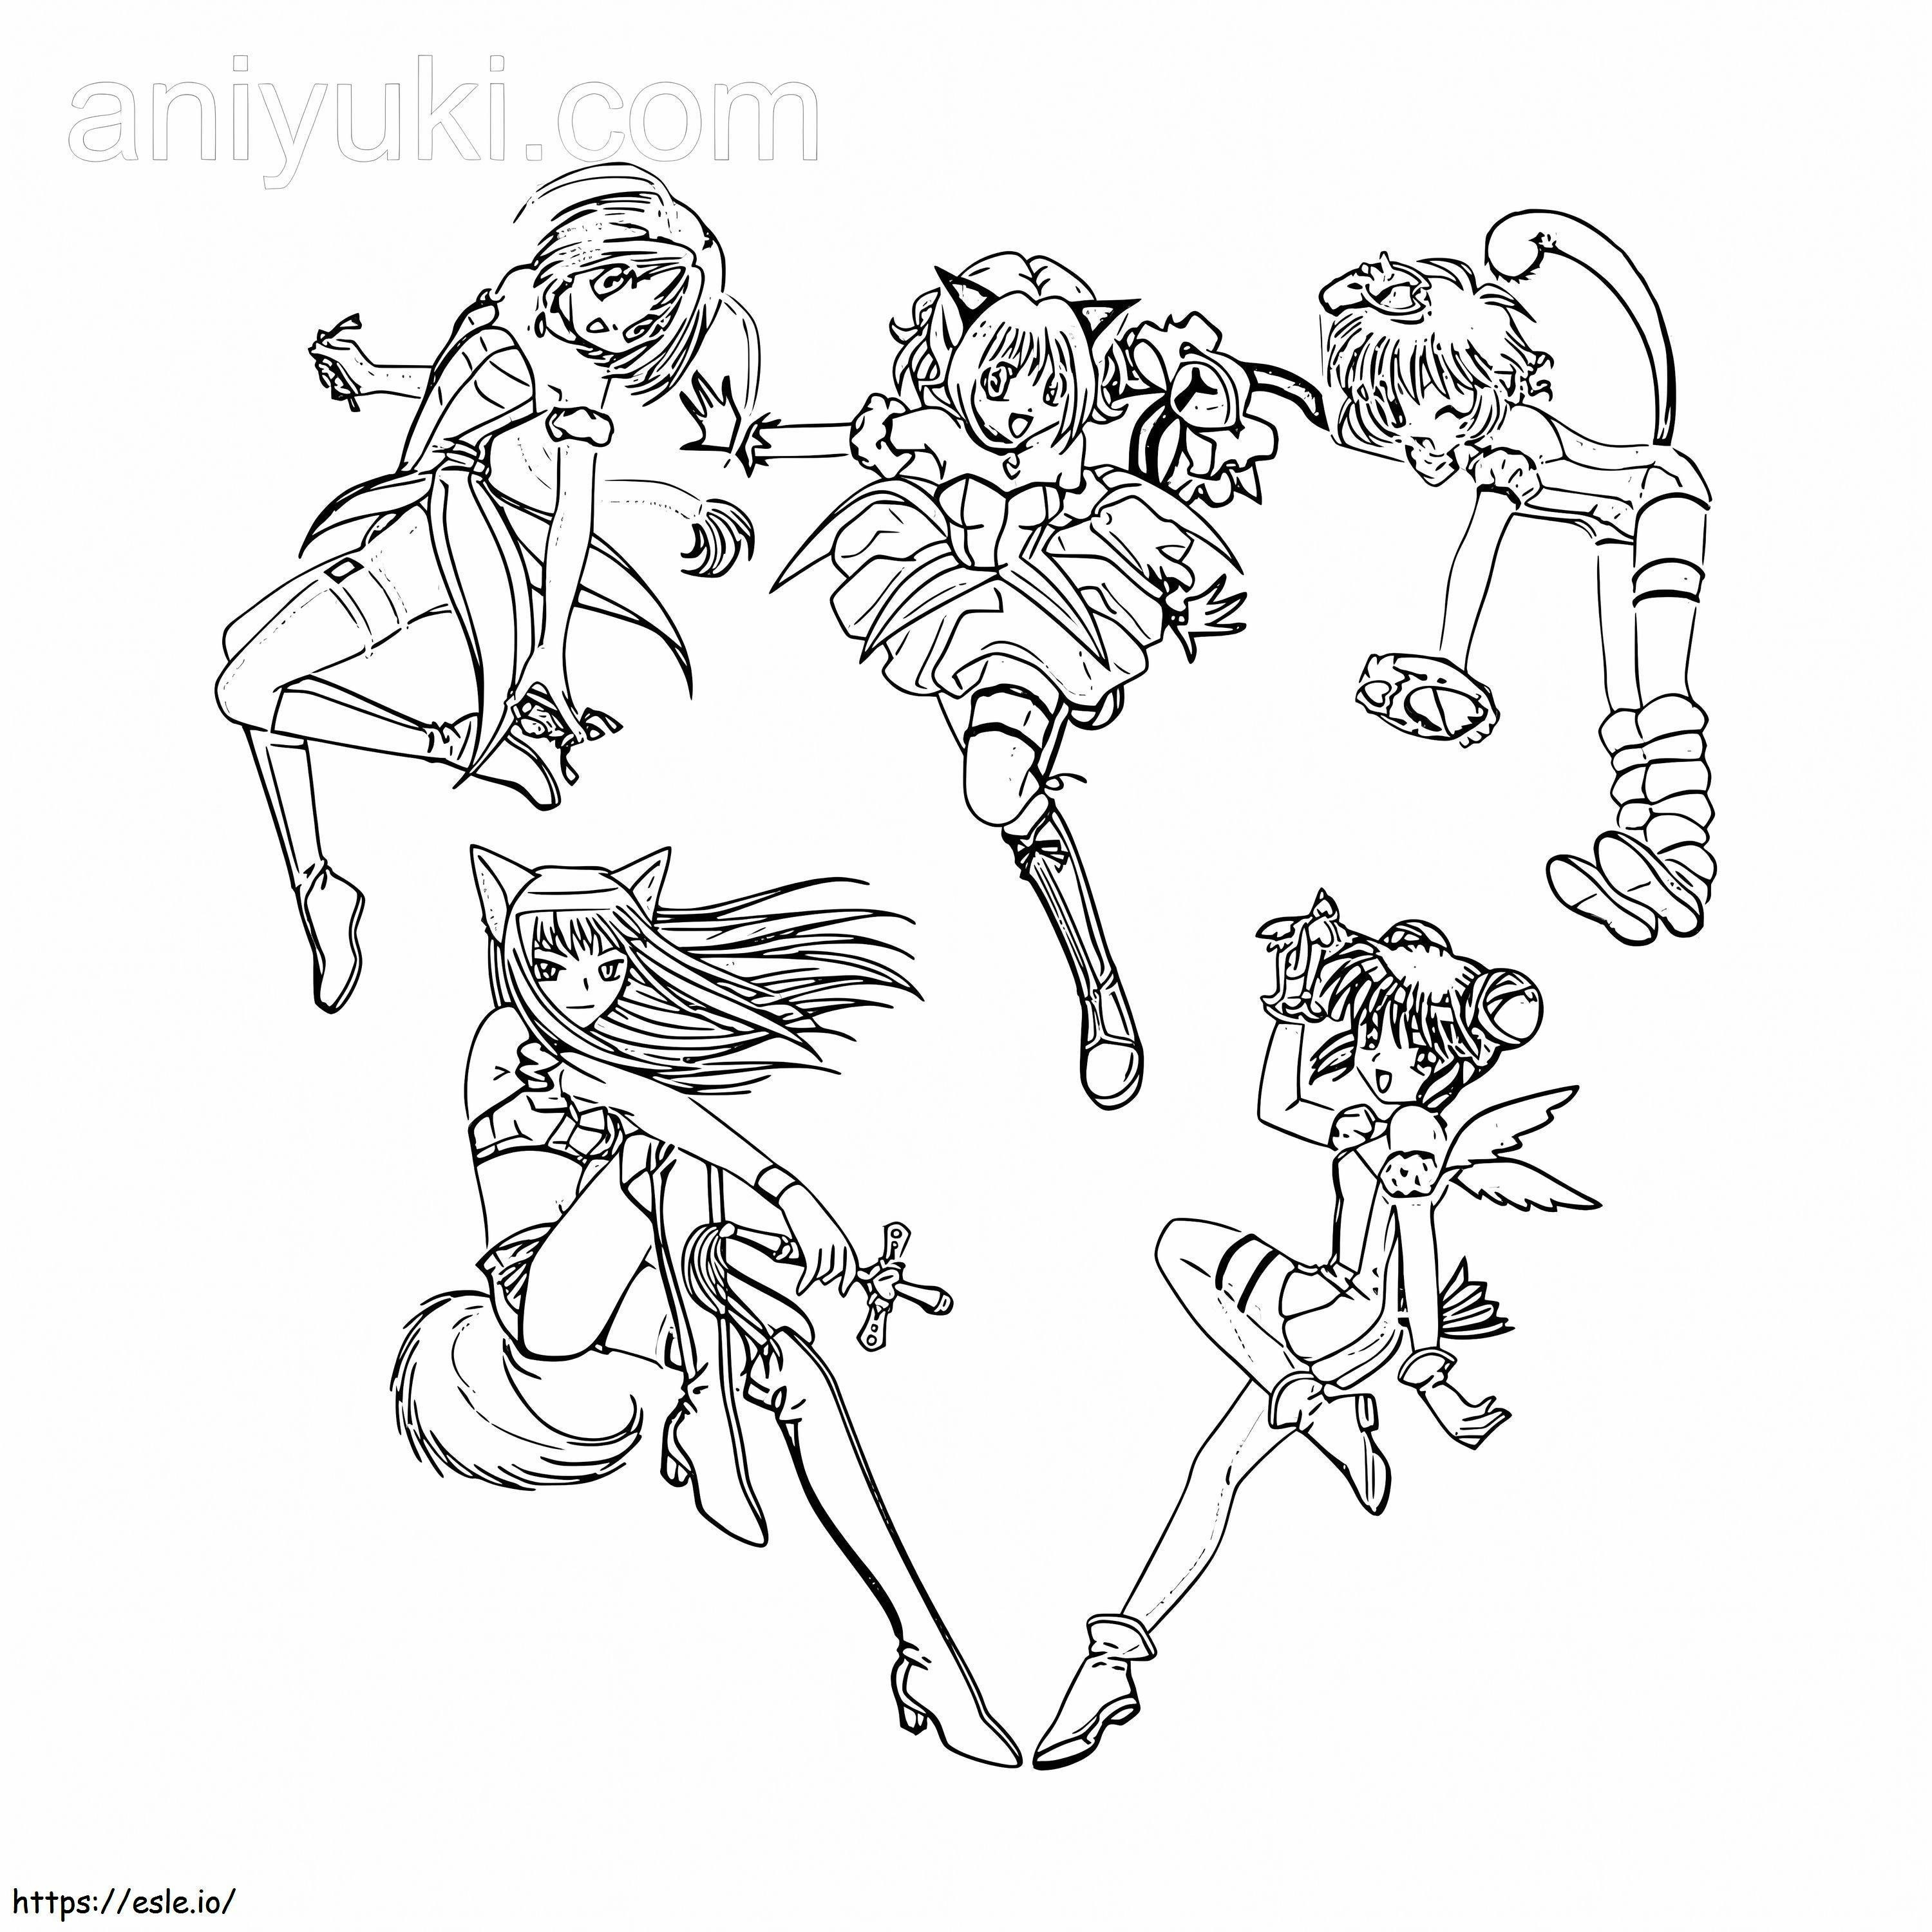 Girls From Tokyo Mew Mew coloring page